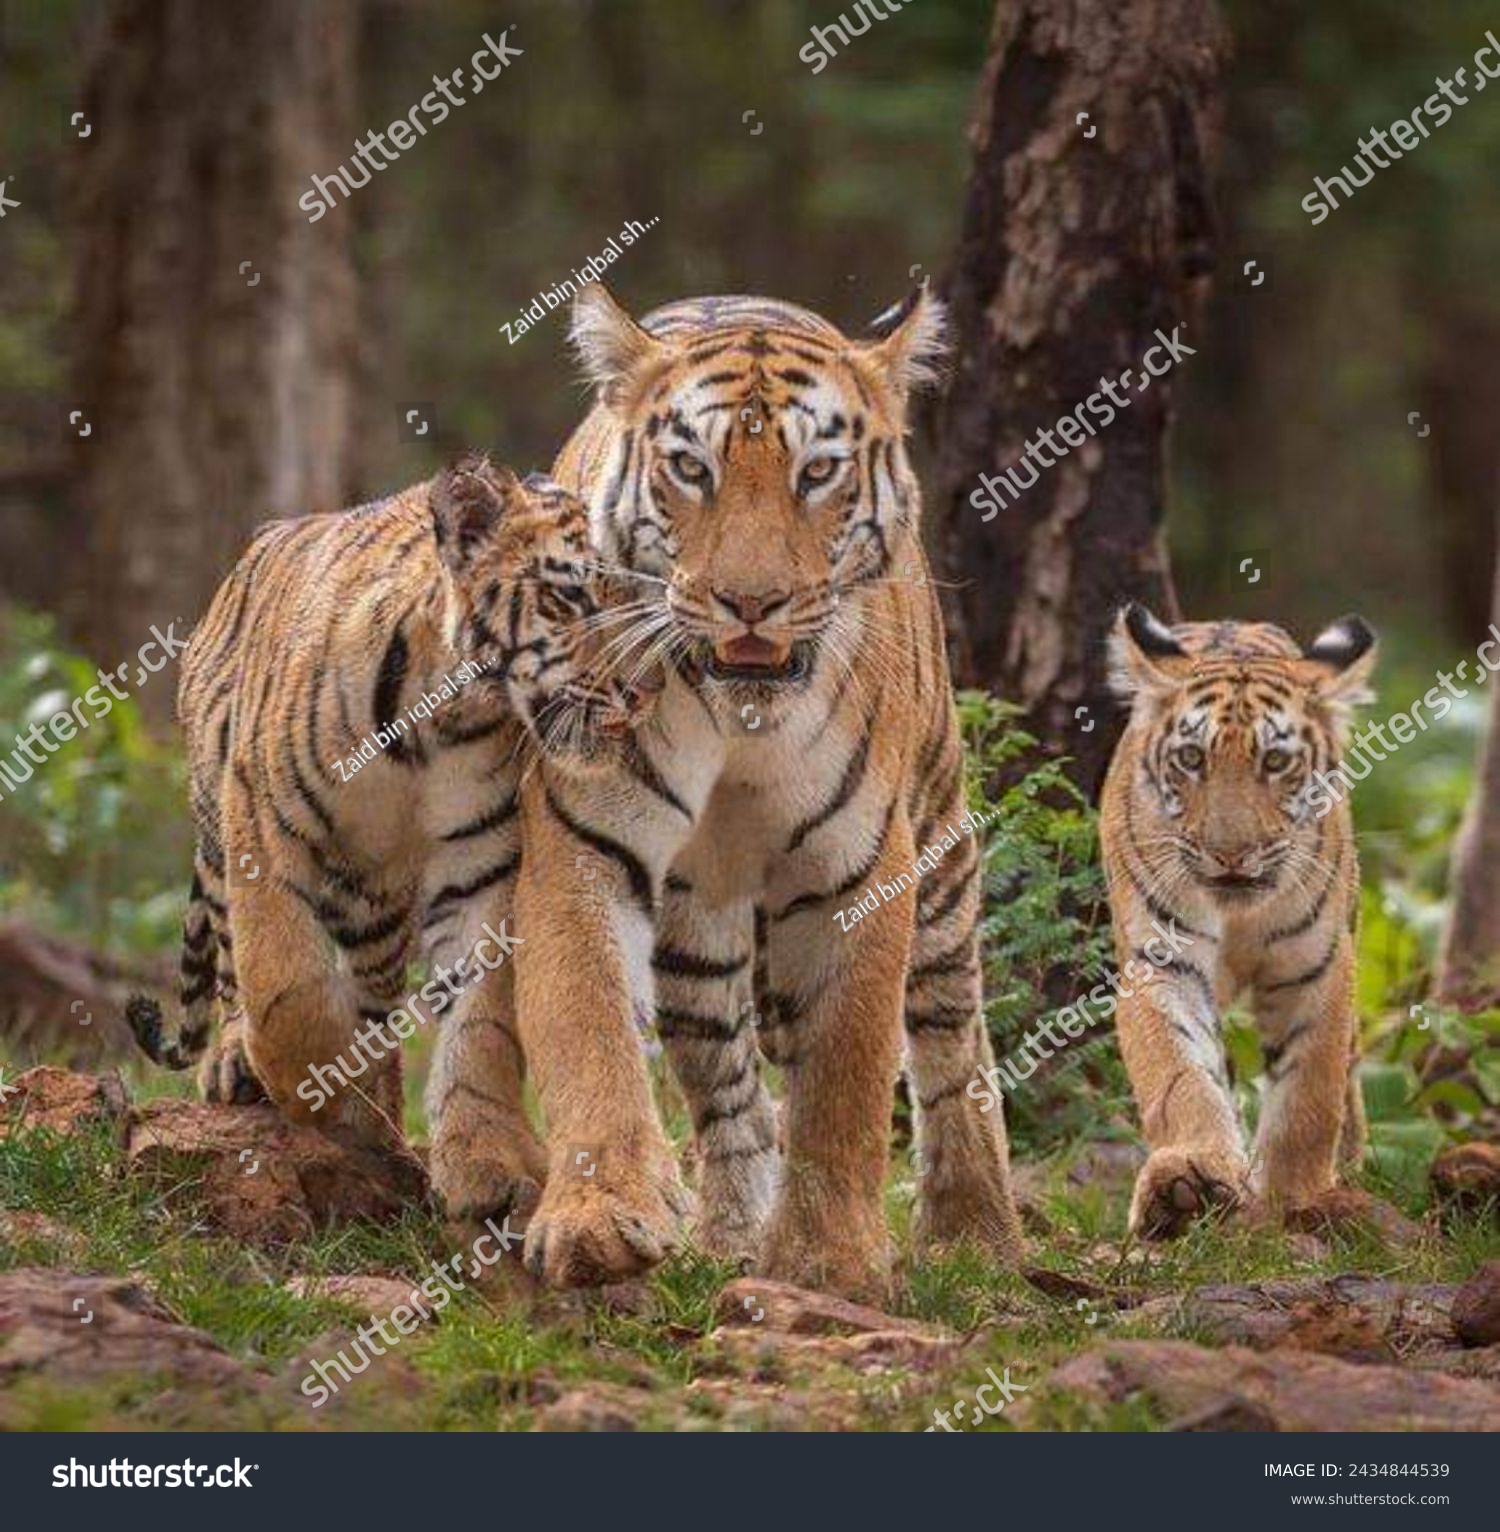 In perfect harmony, a group of tigers strides through their territory, united in their quest for sustenance. With familial bonds strong, they navigate the wilderness, hunting together for their meal. #2434844539